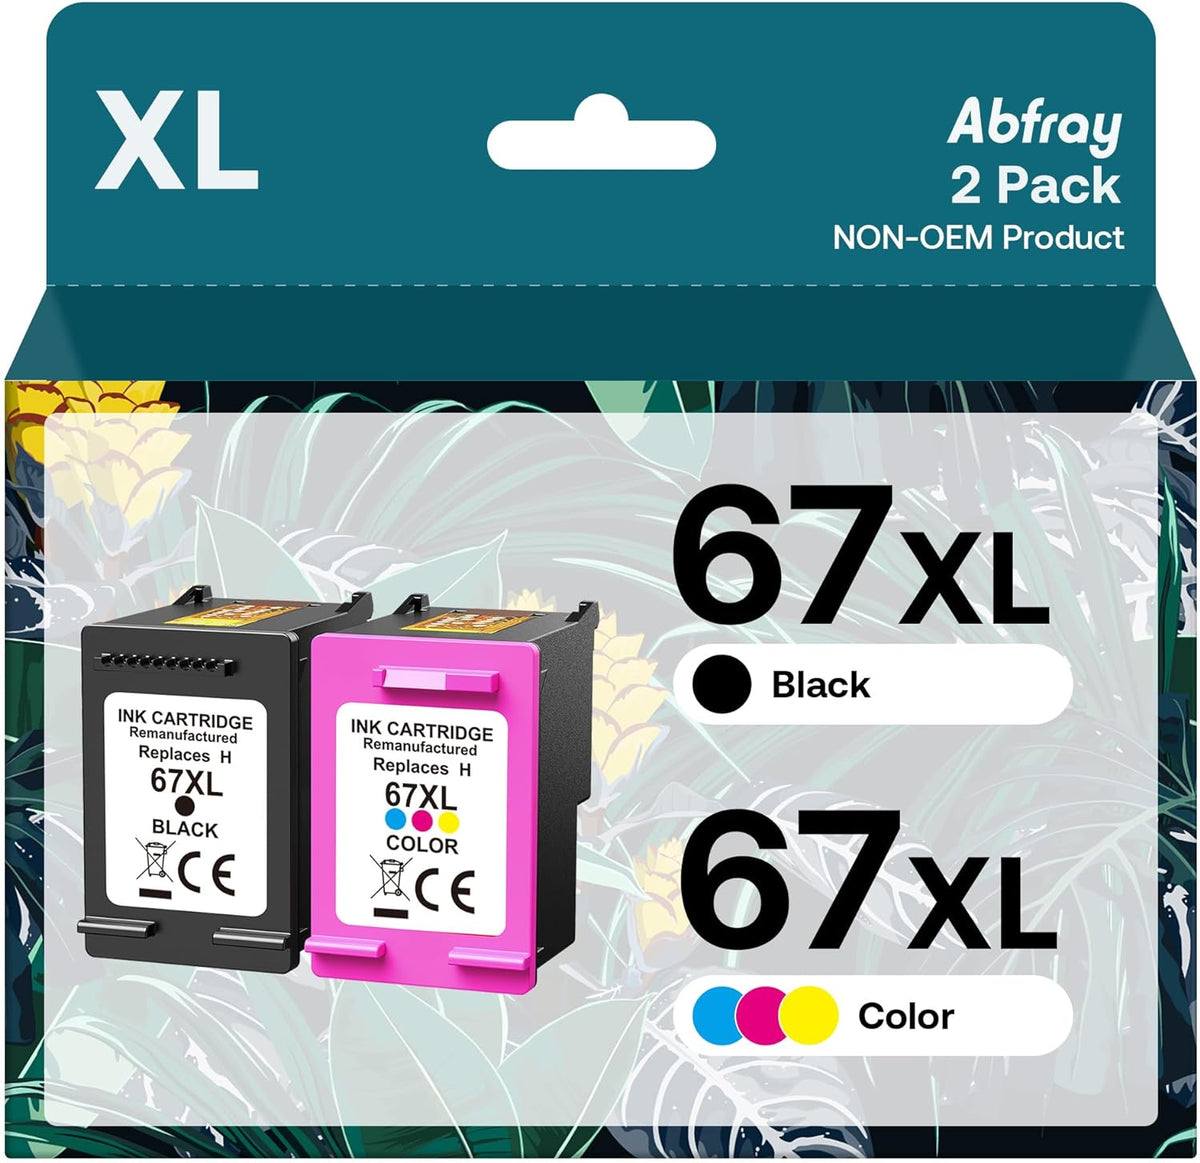 67XL Ink Cartridges Combo Pack Replacement for HP 67 XL High Yield Remanufactured for Envy 6055e 6055 6052 6075 Envy Pro 6455e 6455 6475 6452 6458 DeskJet 4155 2755e 2755 4052 (1 Black, 1 Tri-Color) Cykapu